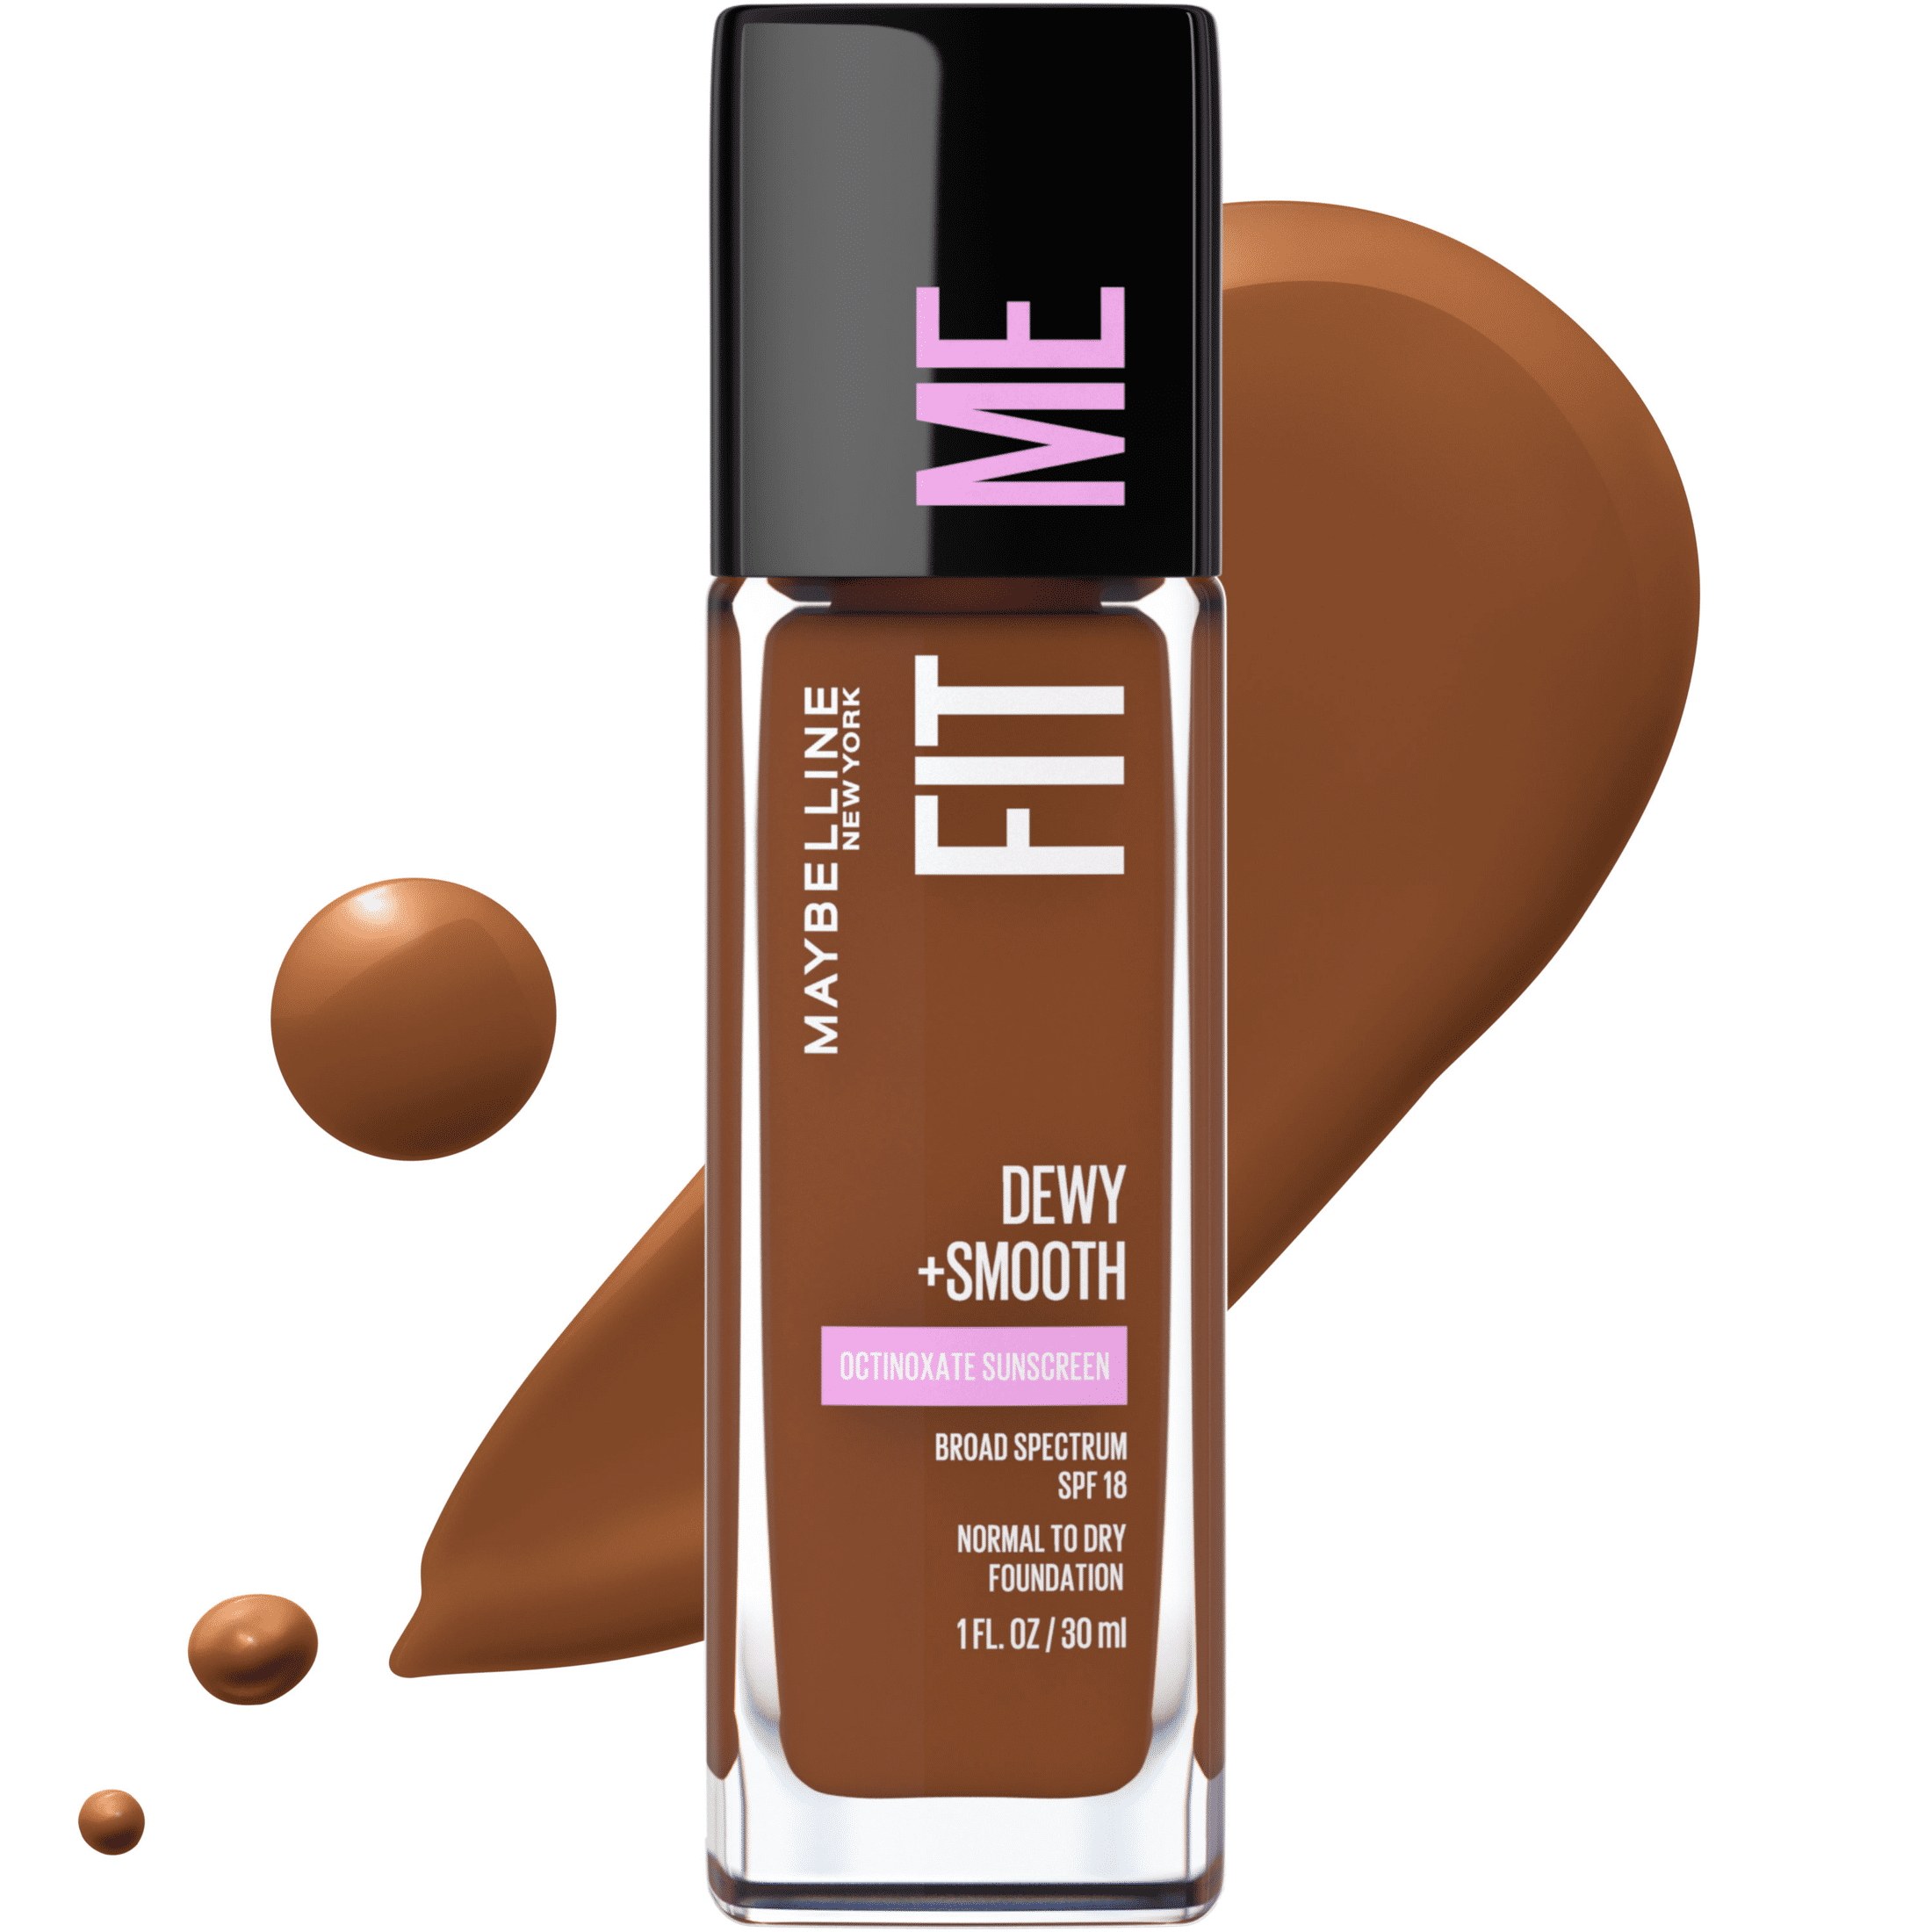 Maybelline Fit Me Dewy and Smooth Liquid Foundation, 230 Natural